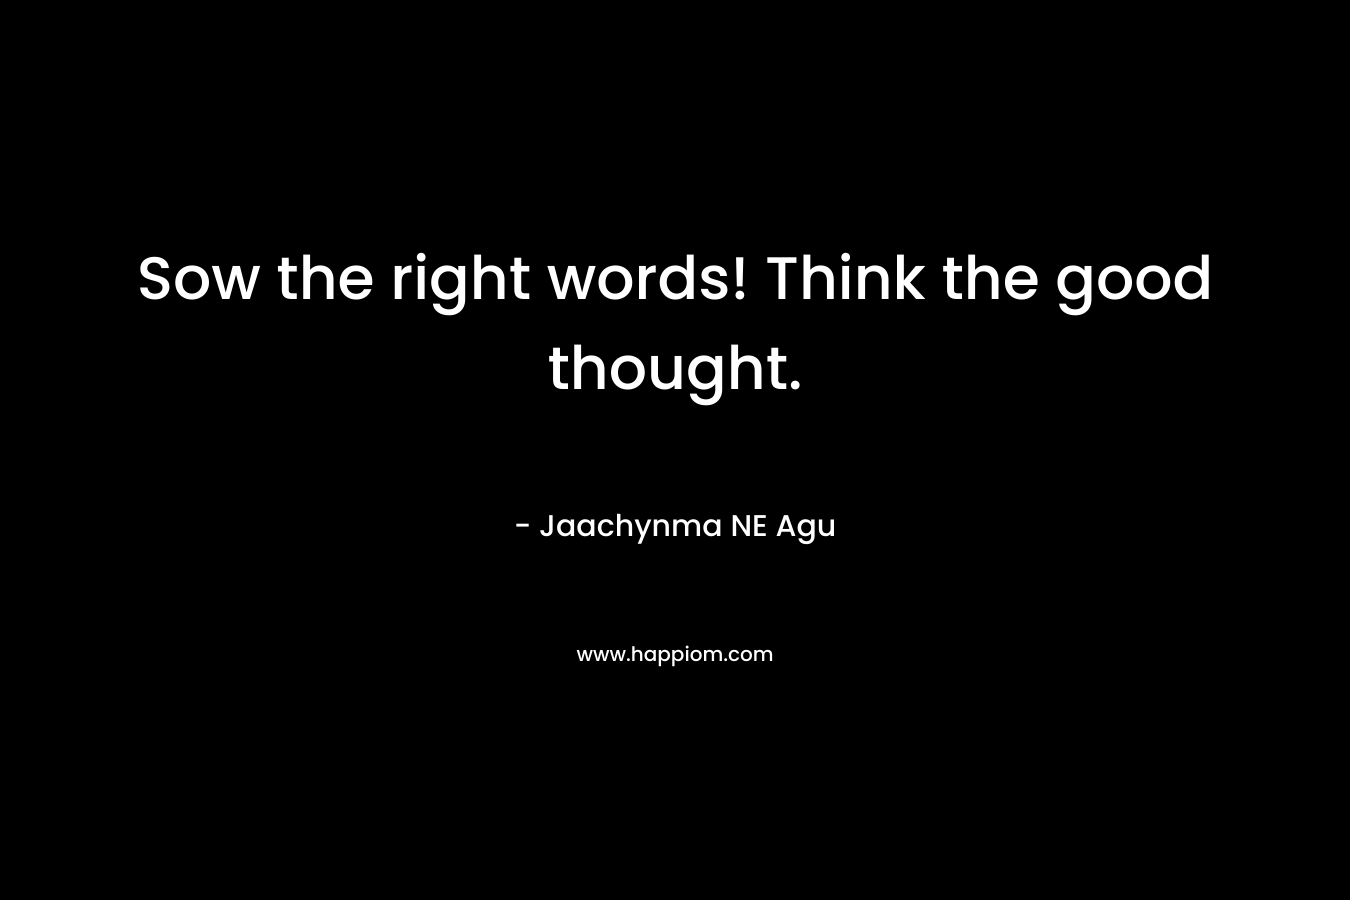 Sow the right words! Think the good thought.